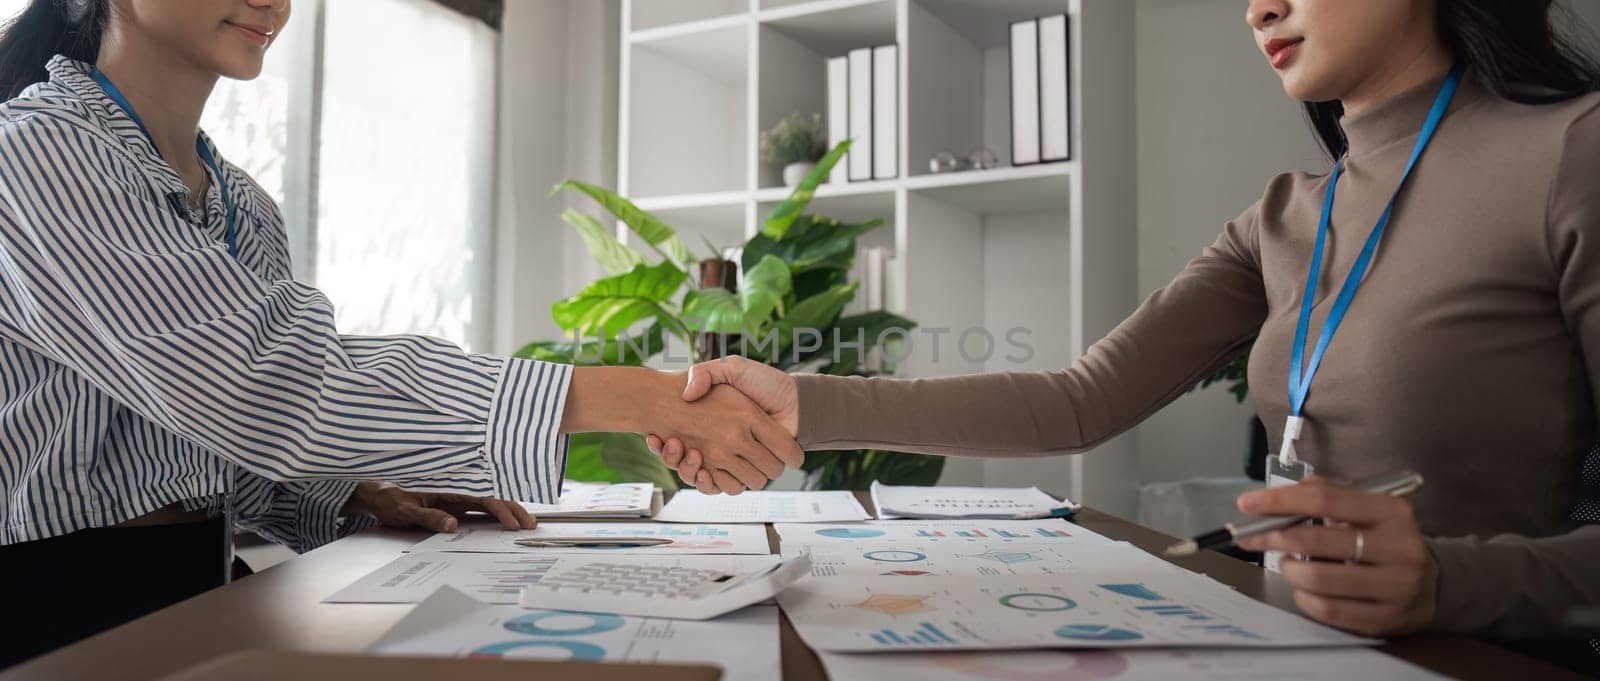 Asian women shaking hands in a modern office. Concept of business agreement, partnership, and success by nateemee